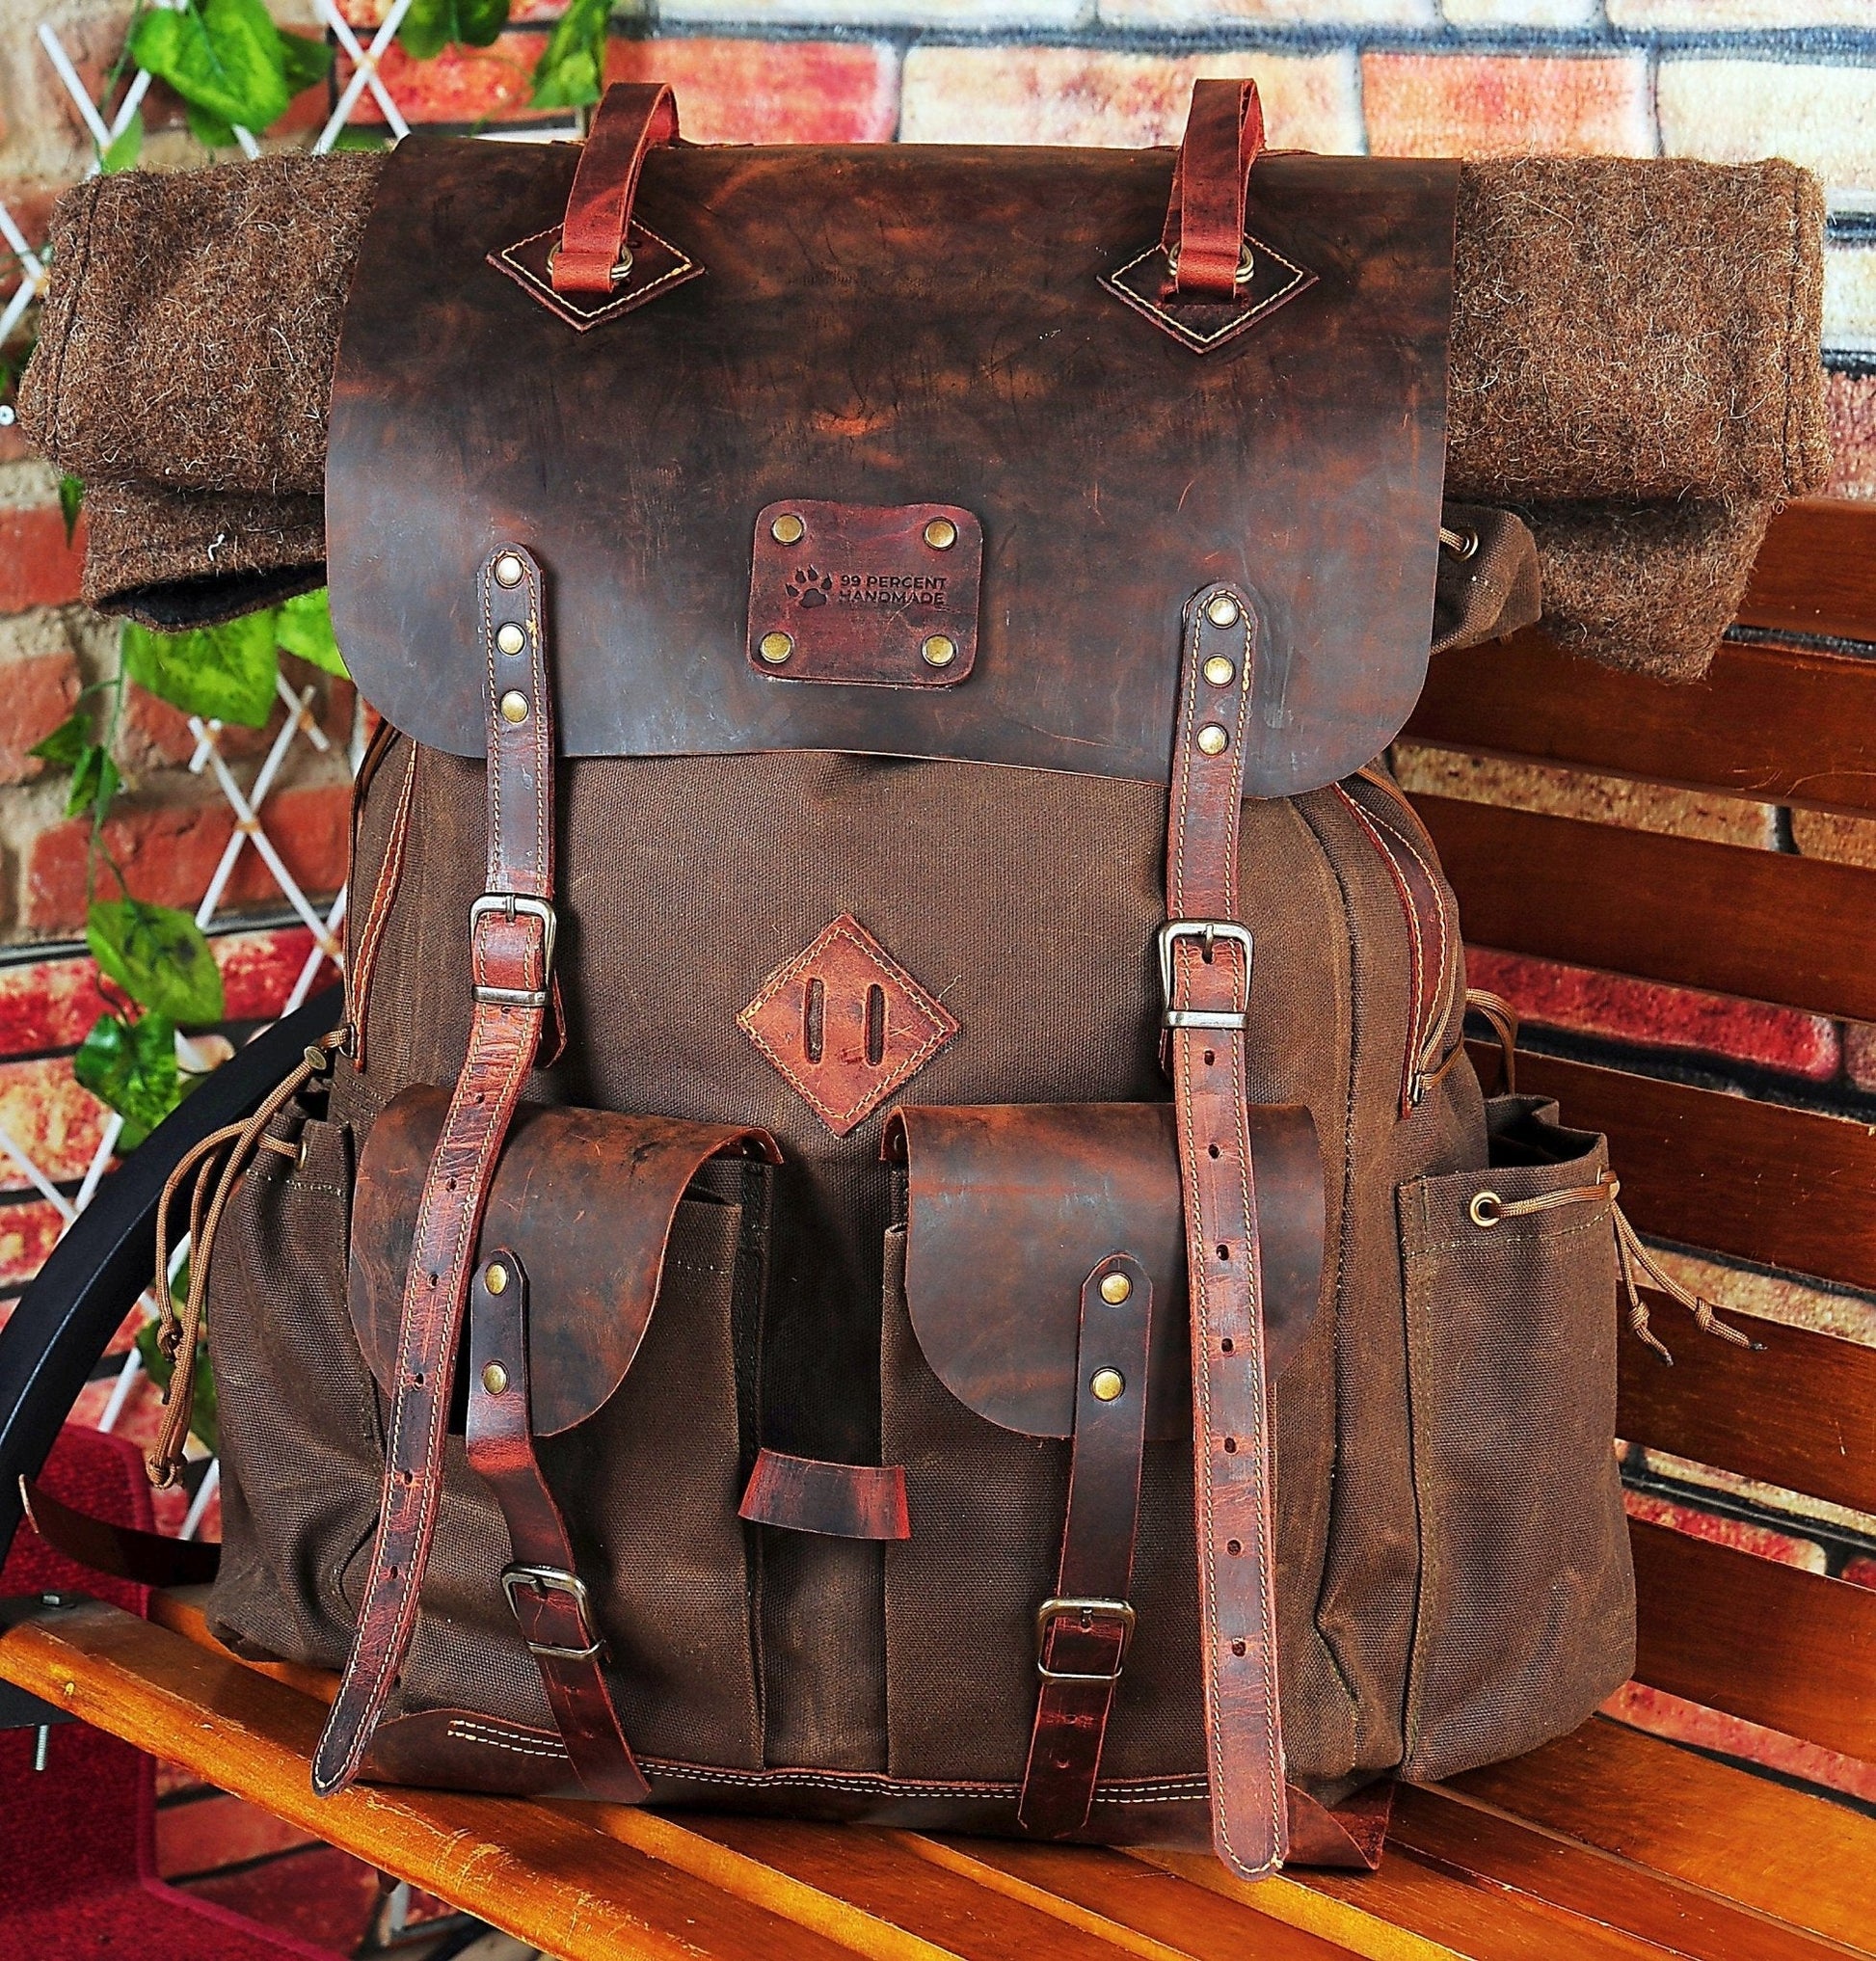 For Andre, 30 Liter to 80 Liter Bushcraft Backpack  Camping Backpack Hiking backpack Canvas Leather Backpack with Black-Brown-Green options  99percenthandmade   